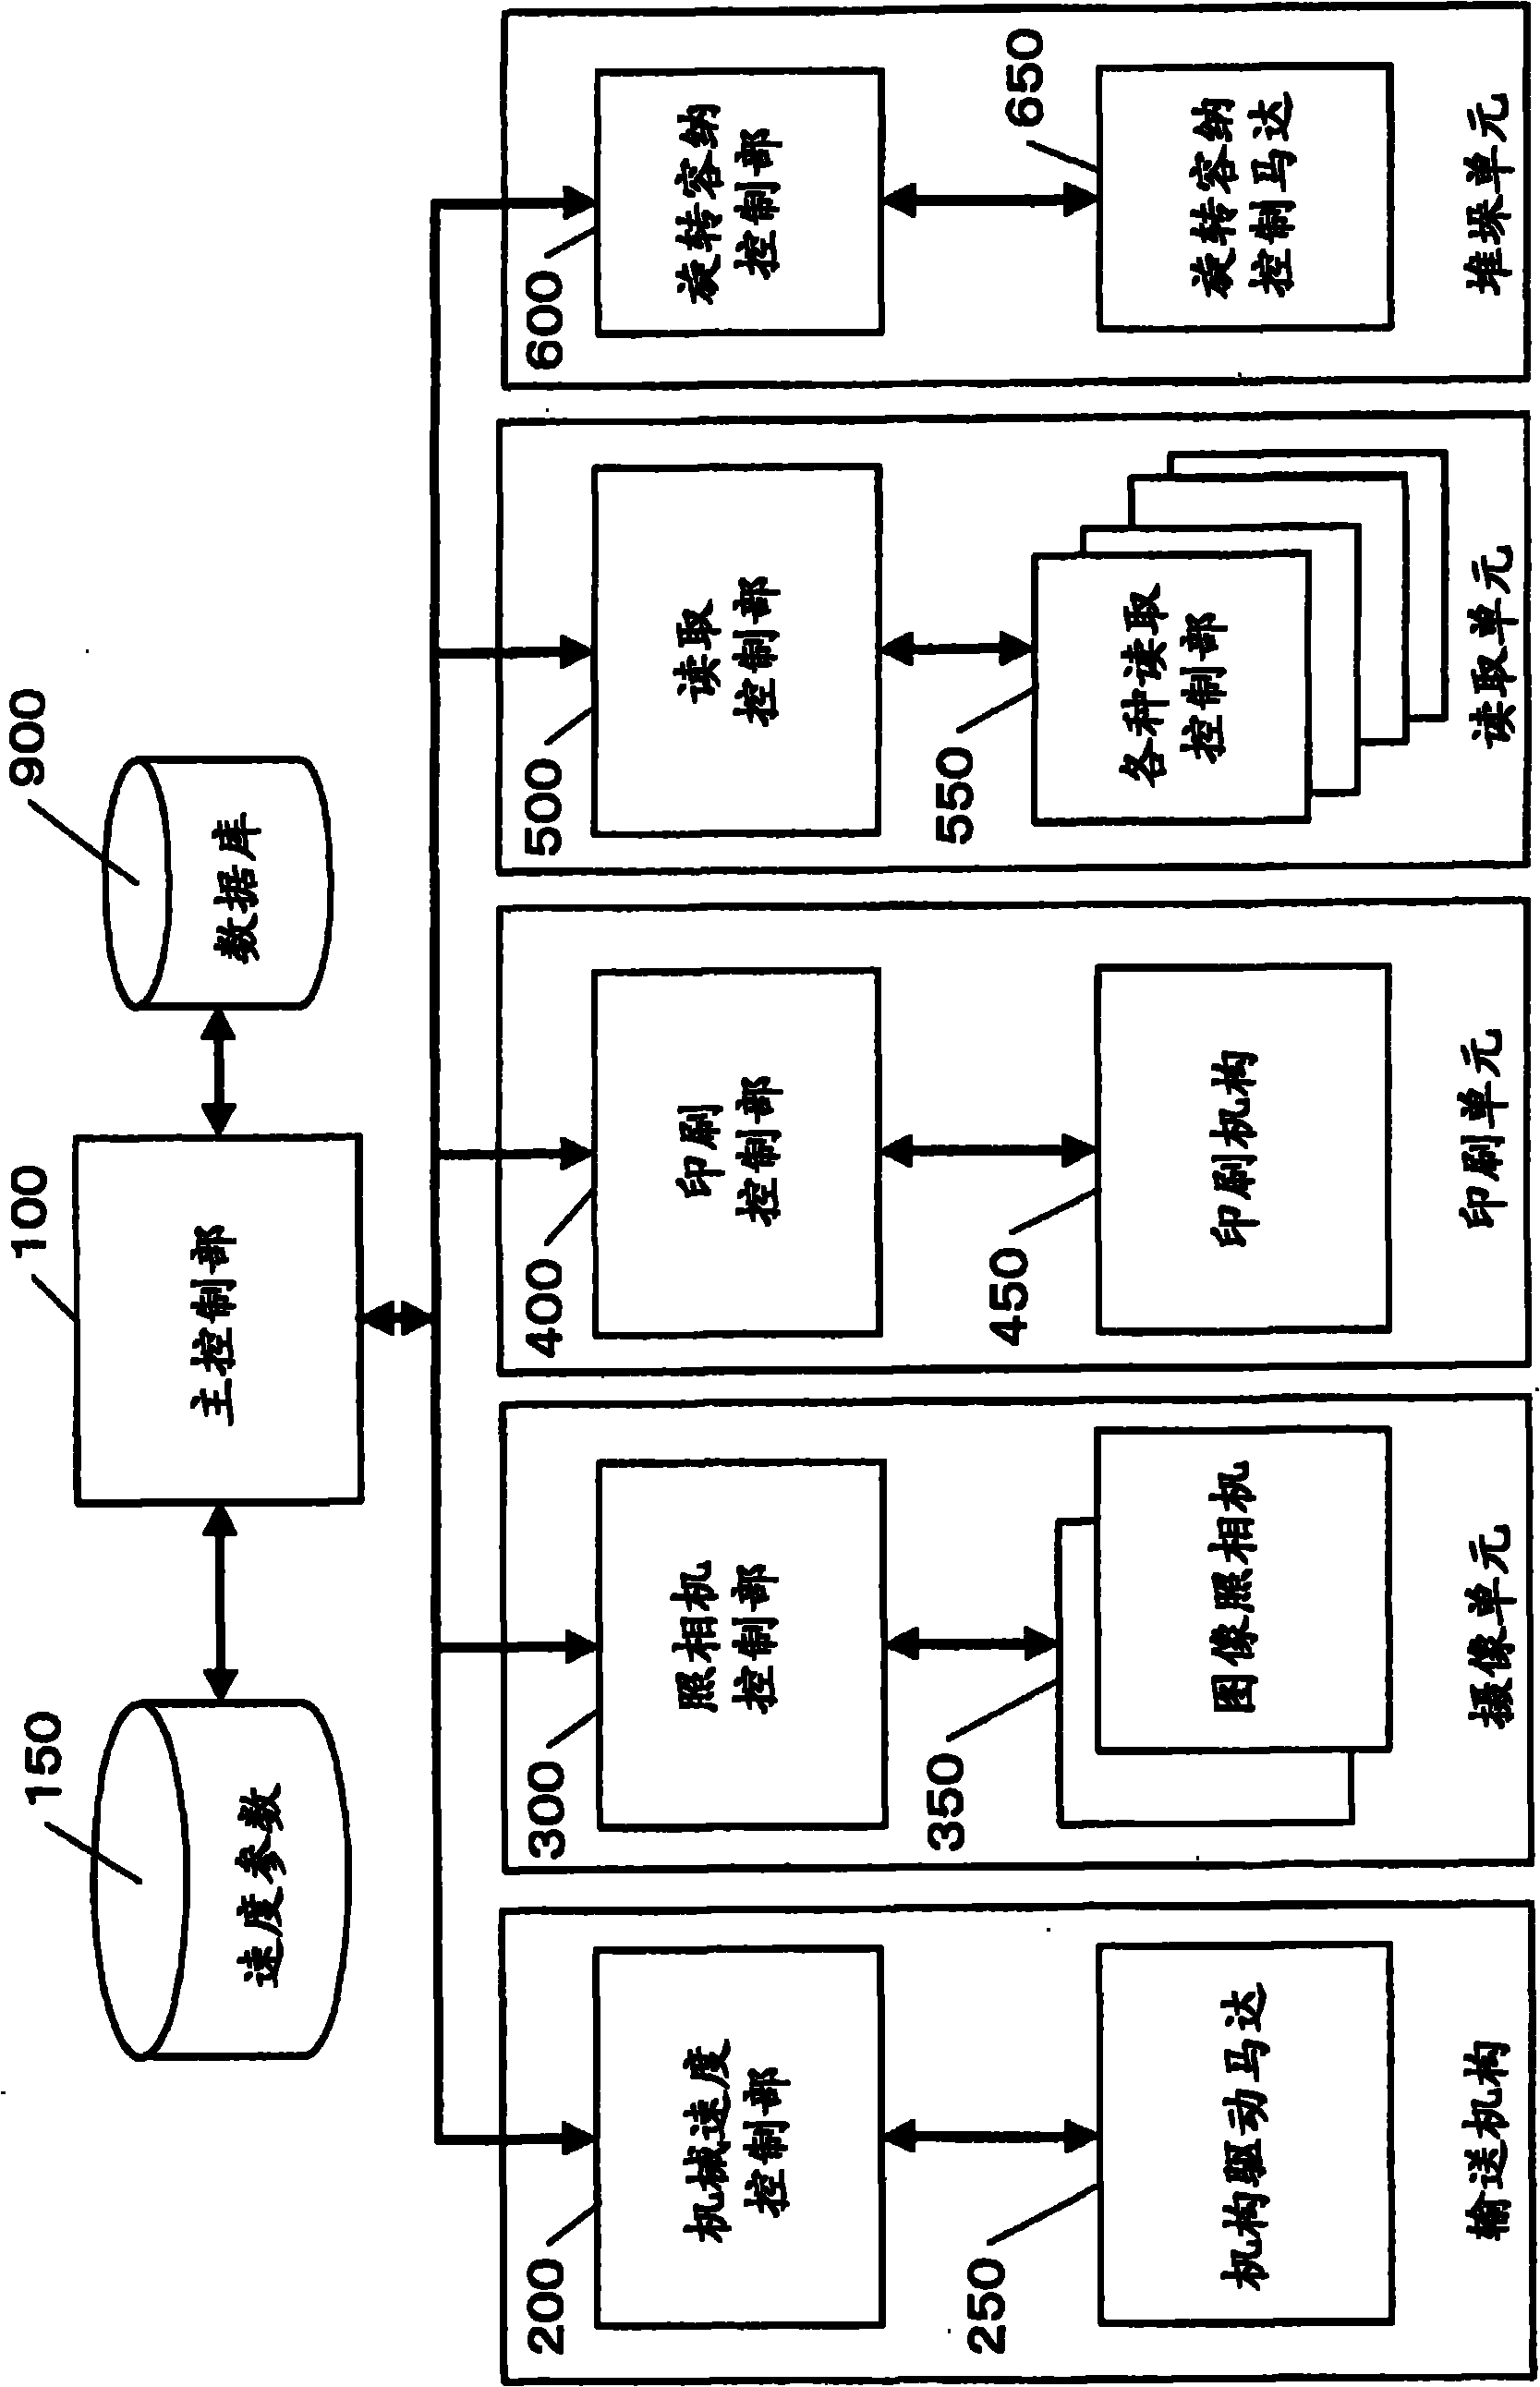 Document delivery apparatus and method of controlling the same